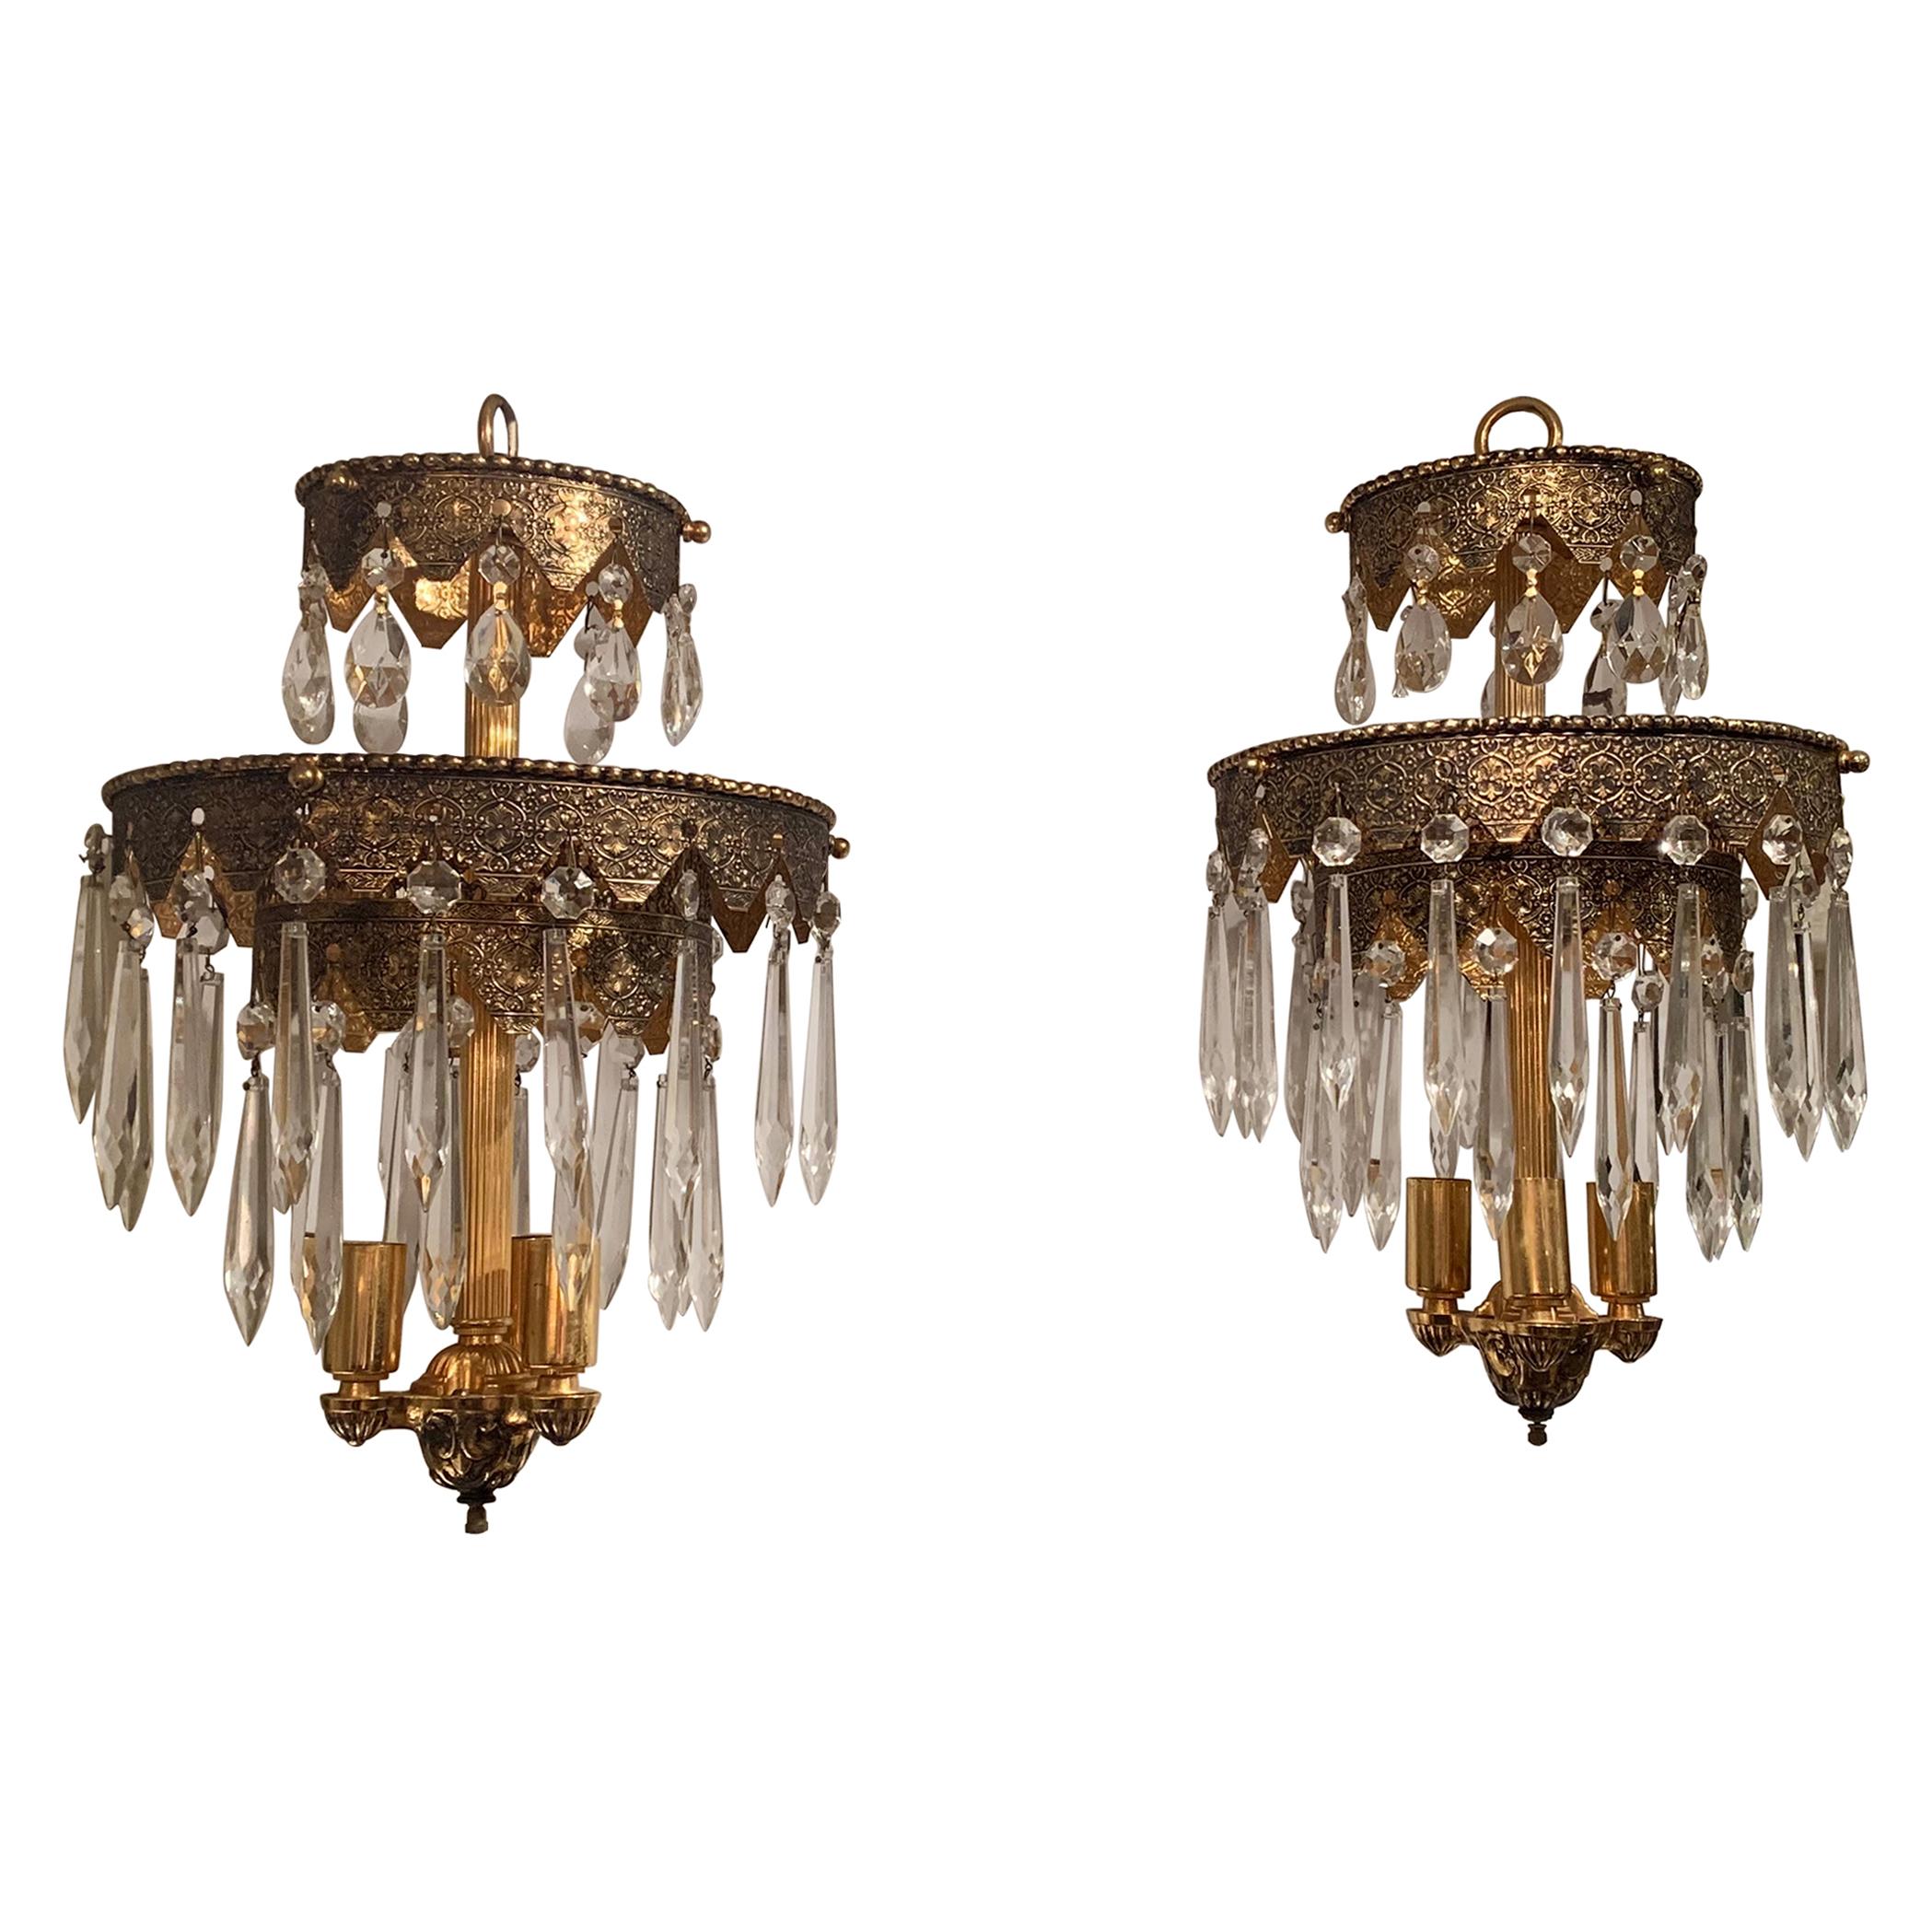 Pair of Glitzy Etched Metal and Crystal Pendant Chandeliers